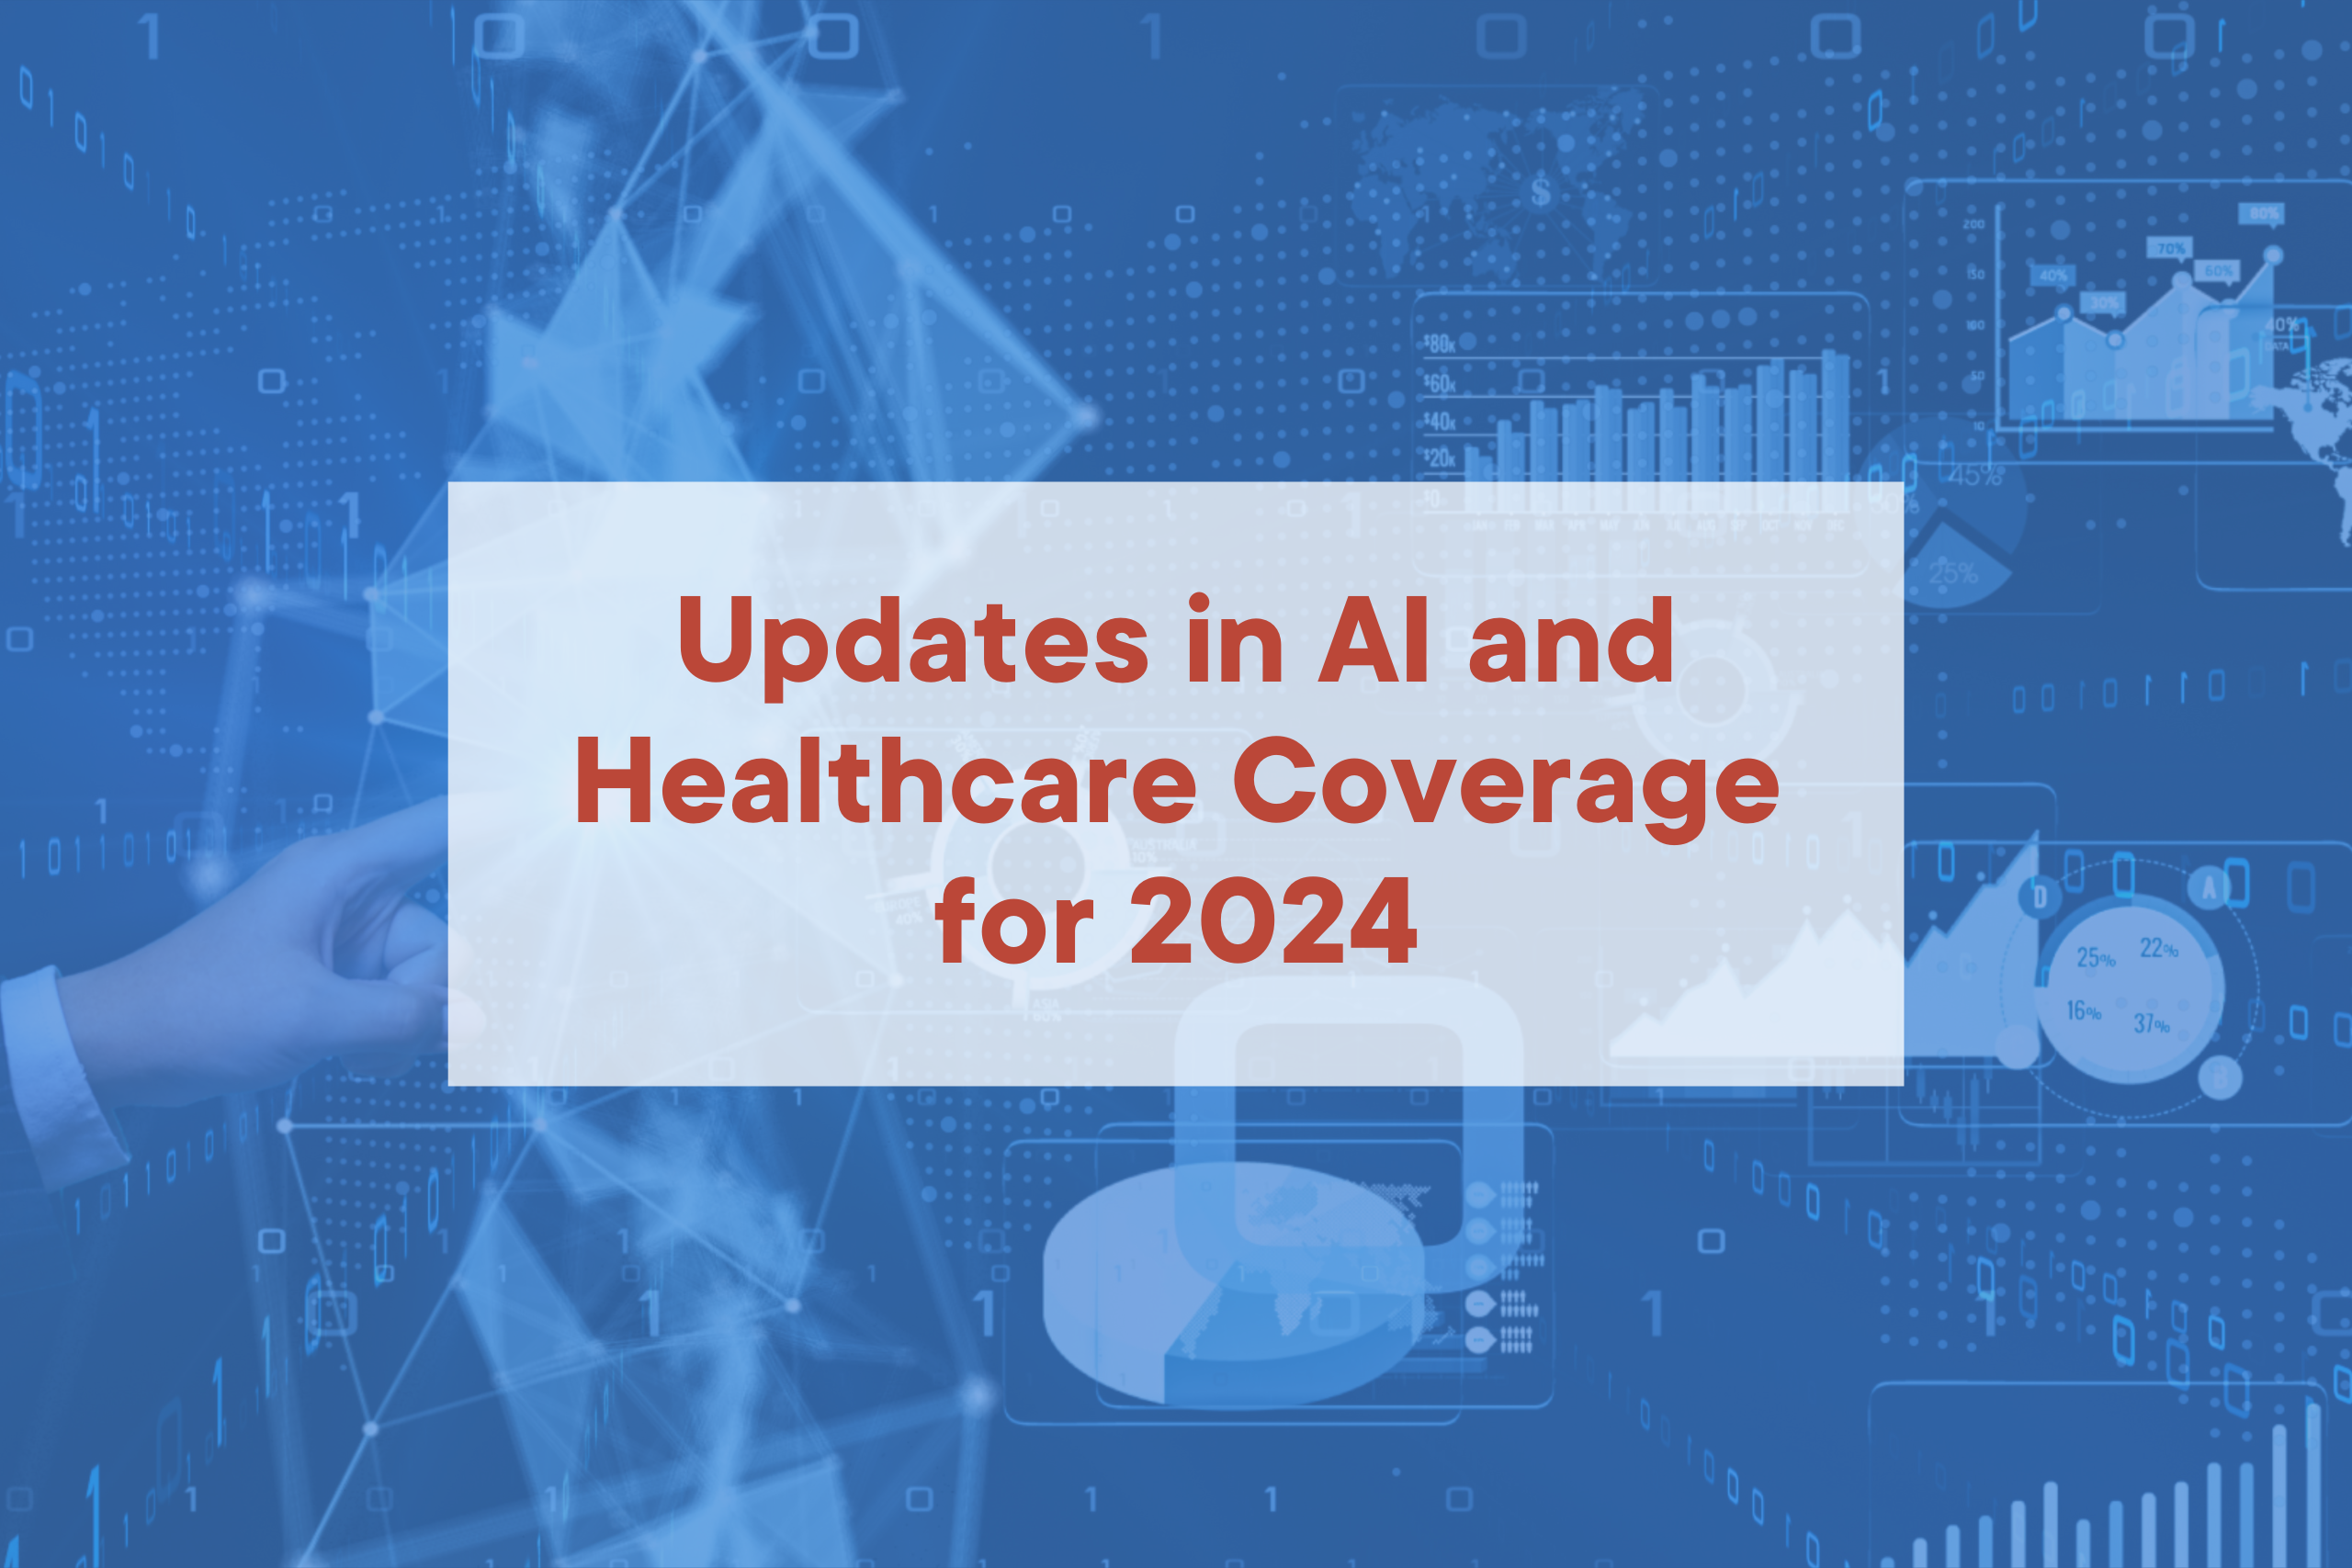 Important Updates in AI and Healthcare Coverage for 2024